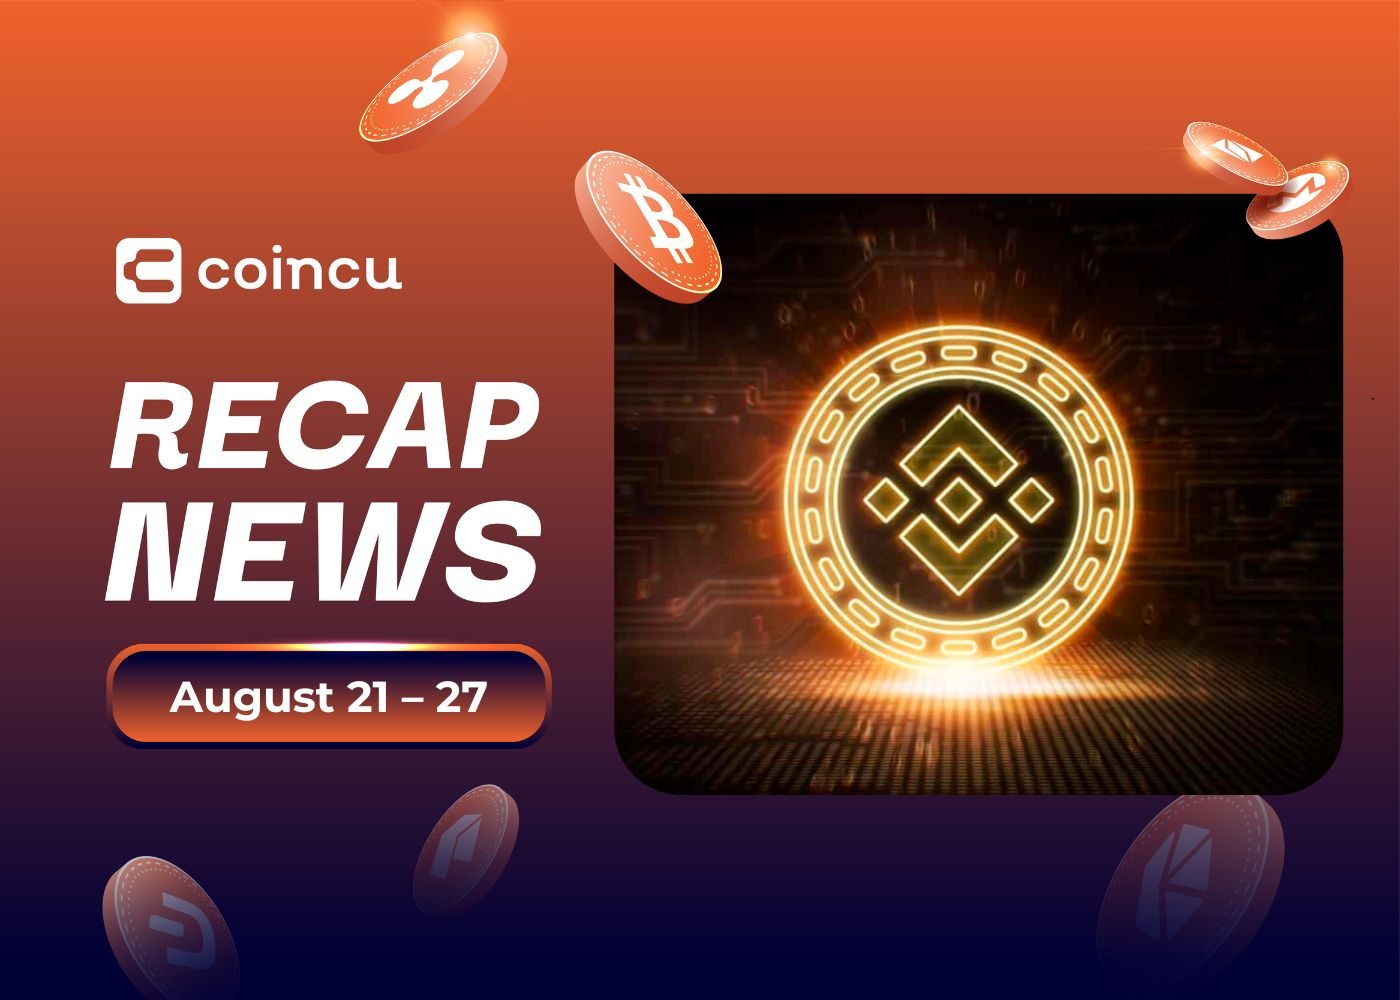 Weekly Top Crypto News (August 21 – August 27)